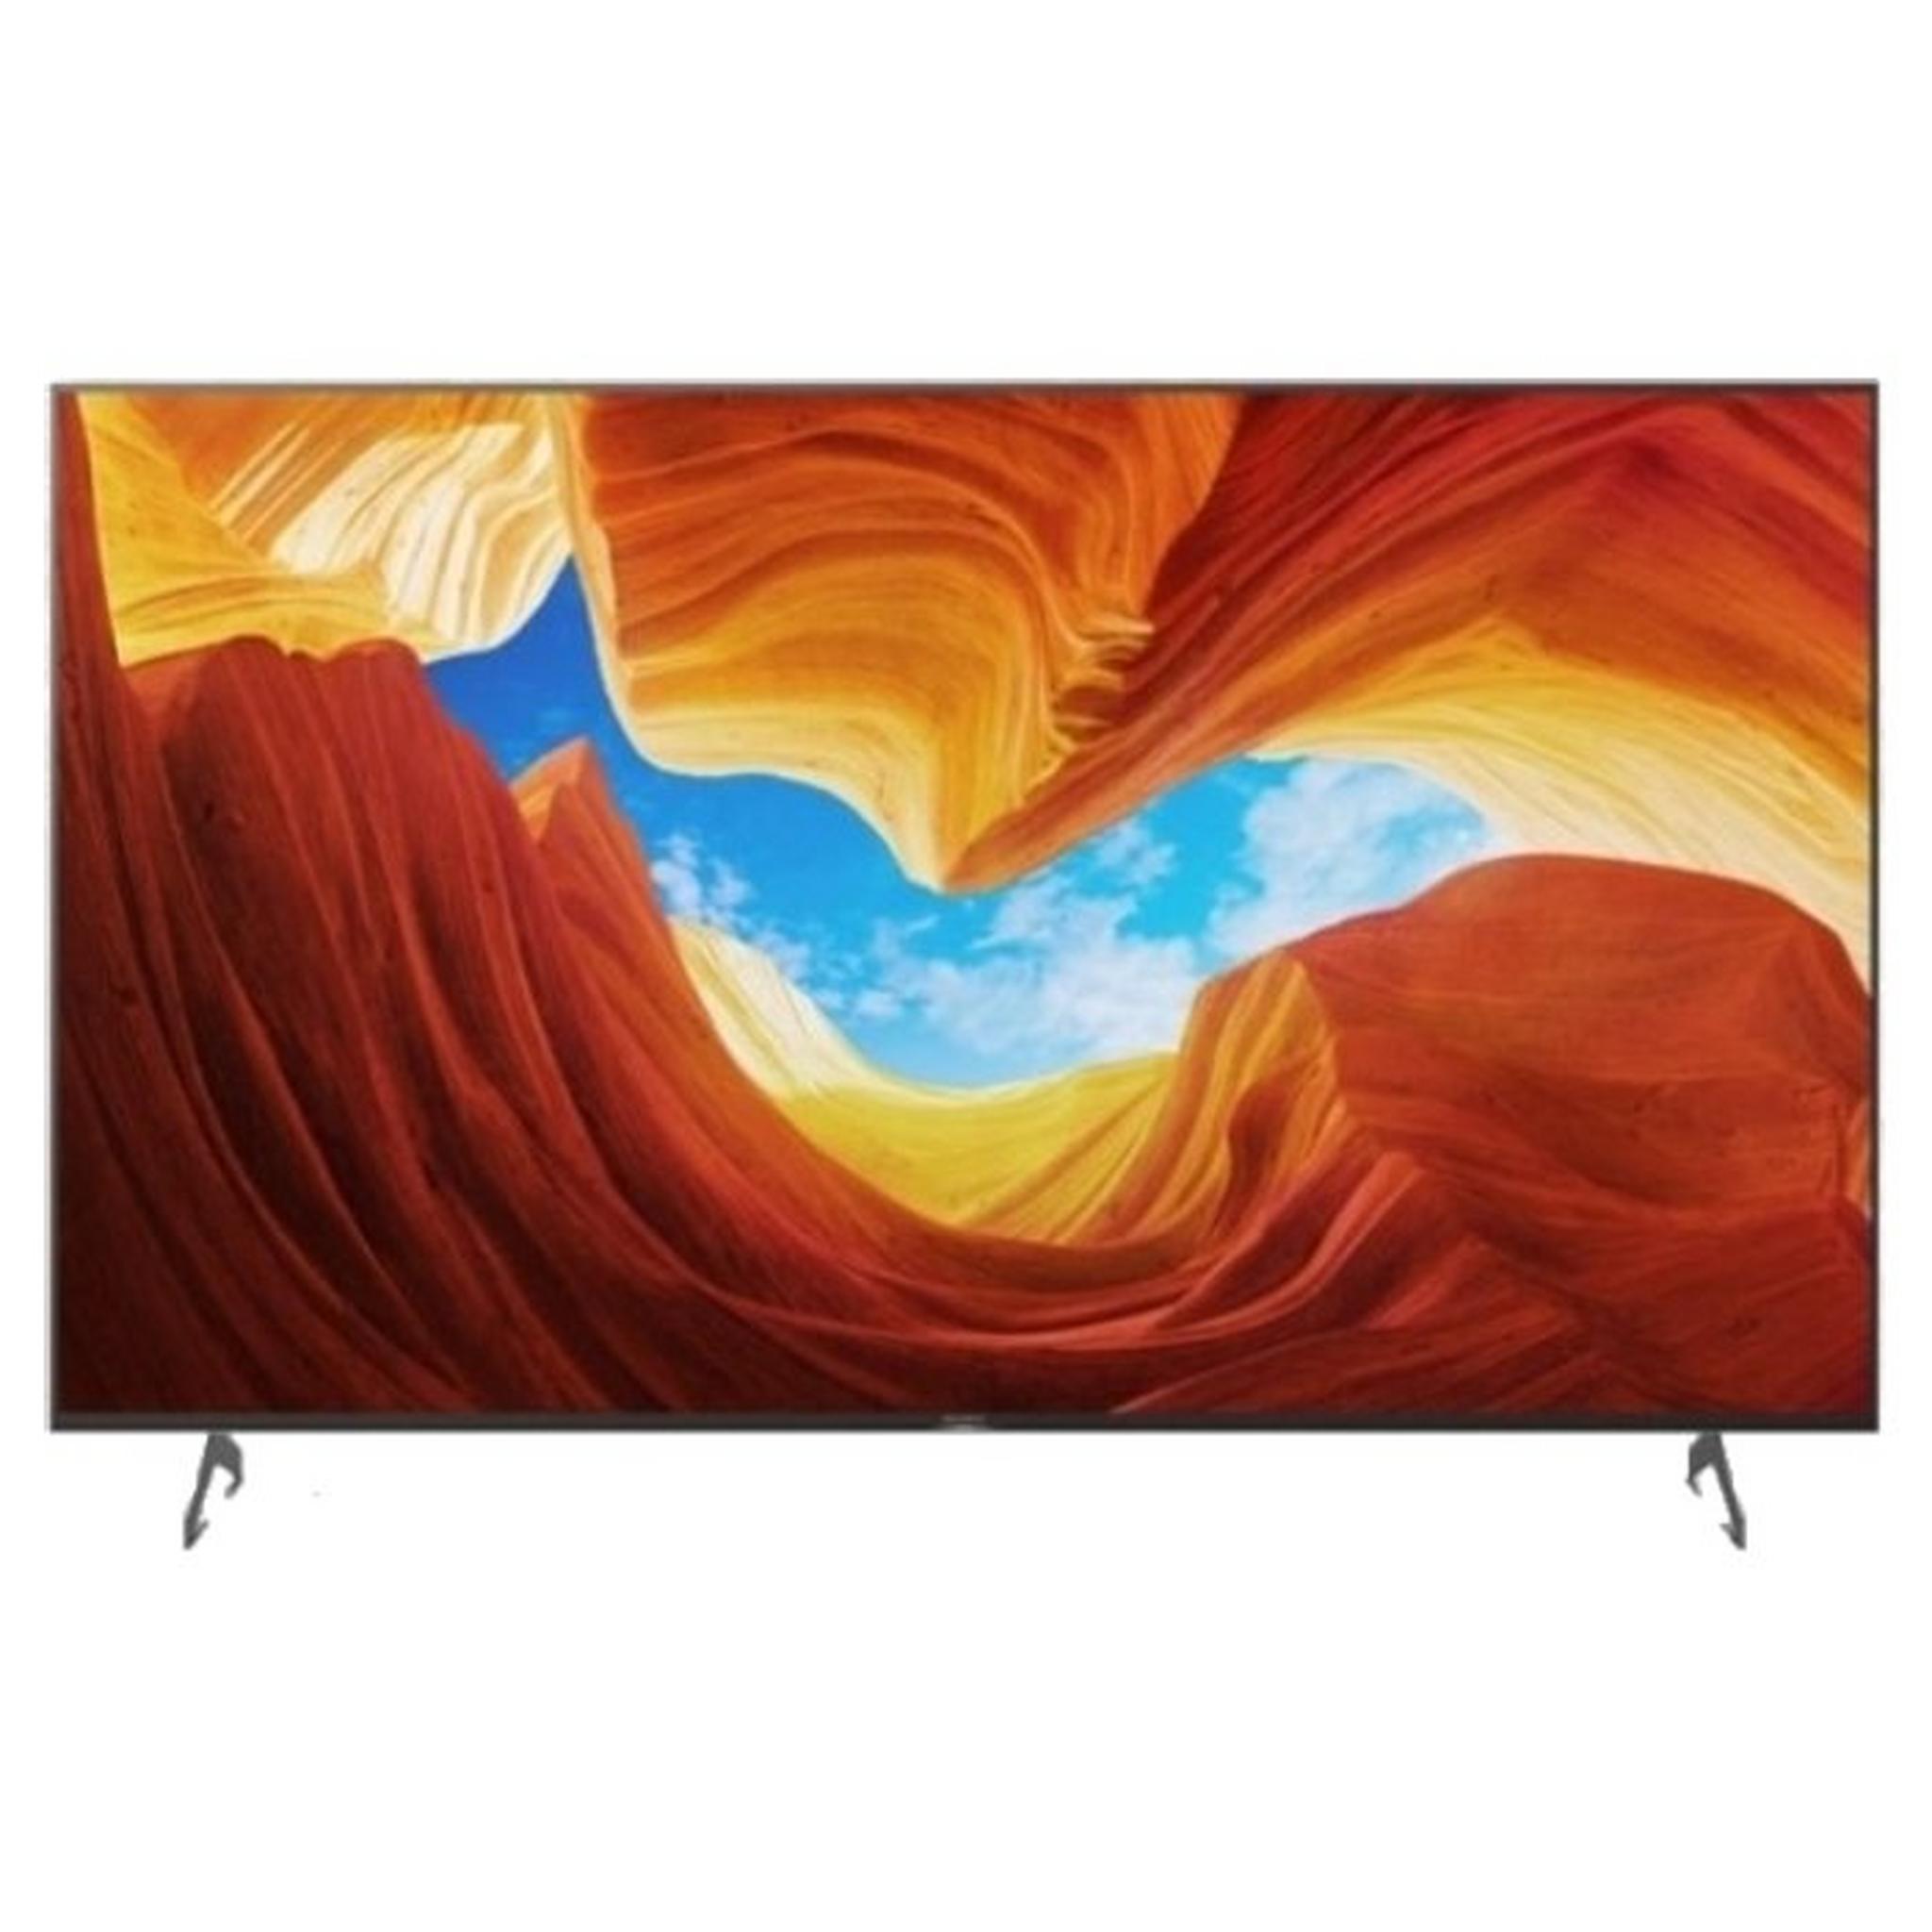 Sony Series X80J 55-inch 4K Android LED TV (KD-55X80J)